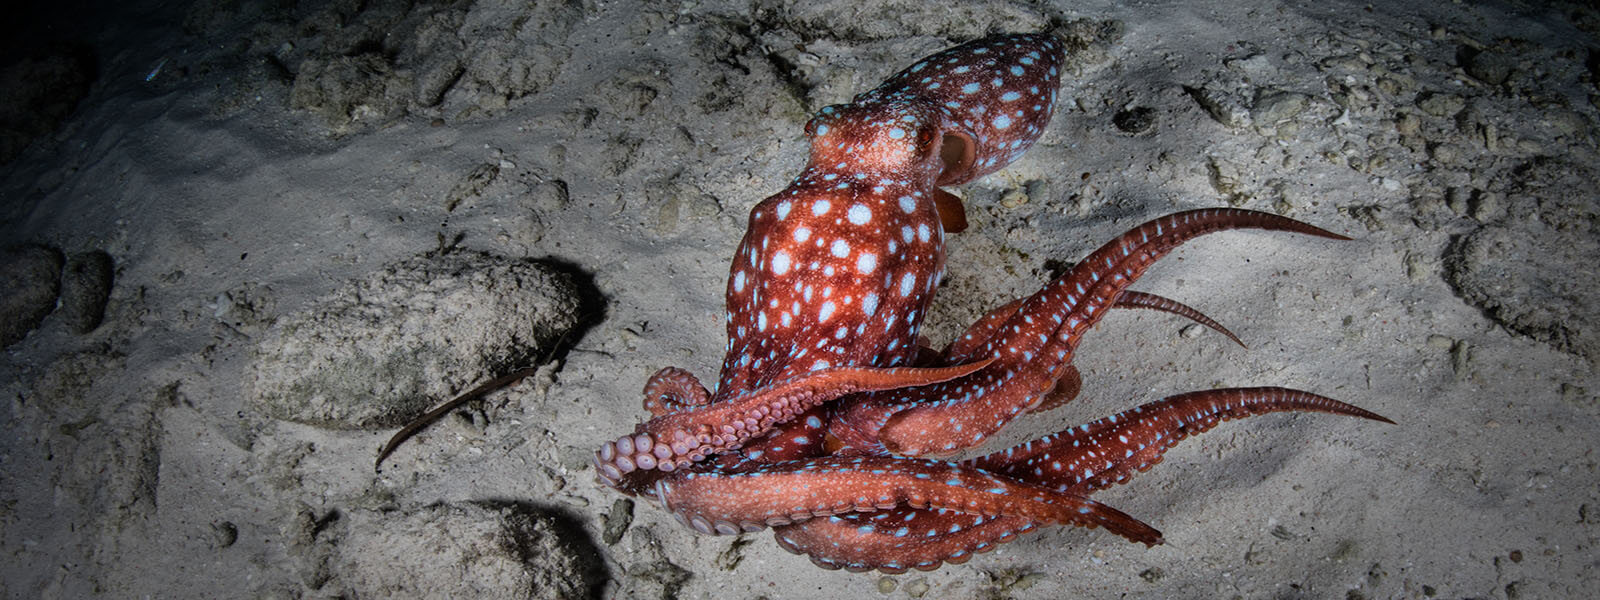 Starry night octopus are seen on many of our night snorkels in places like the Philippines, Komodo, and Raja Ampat